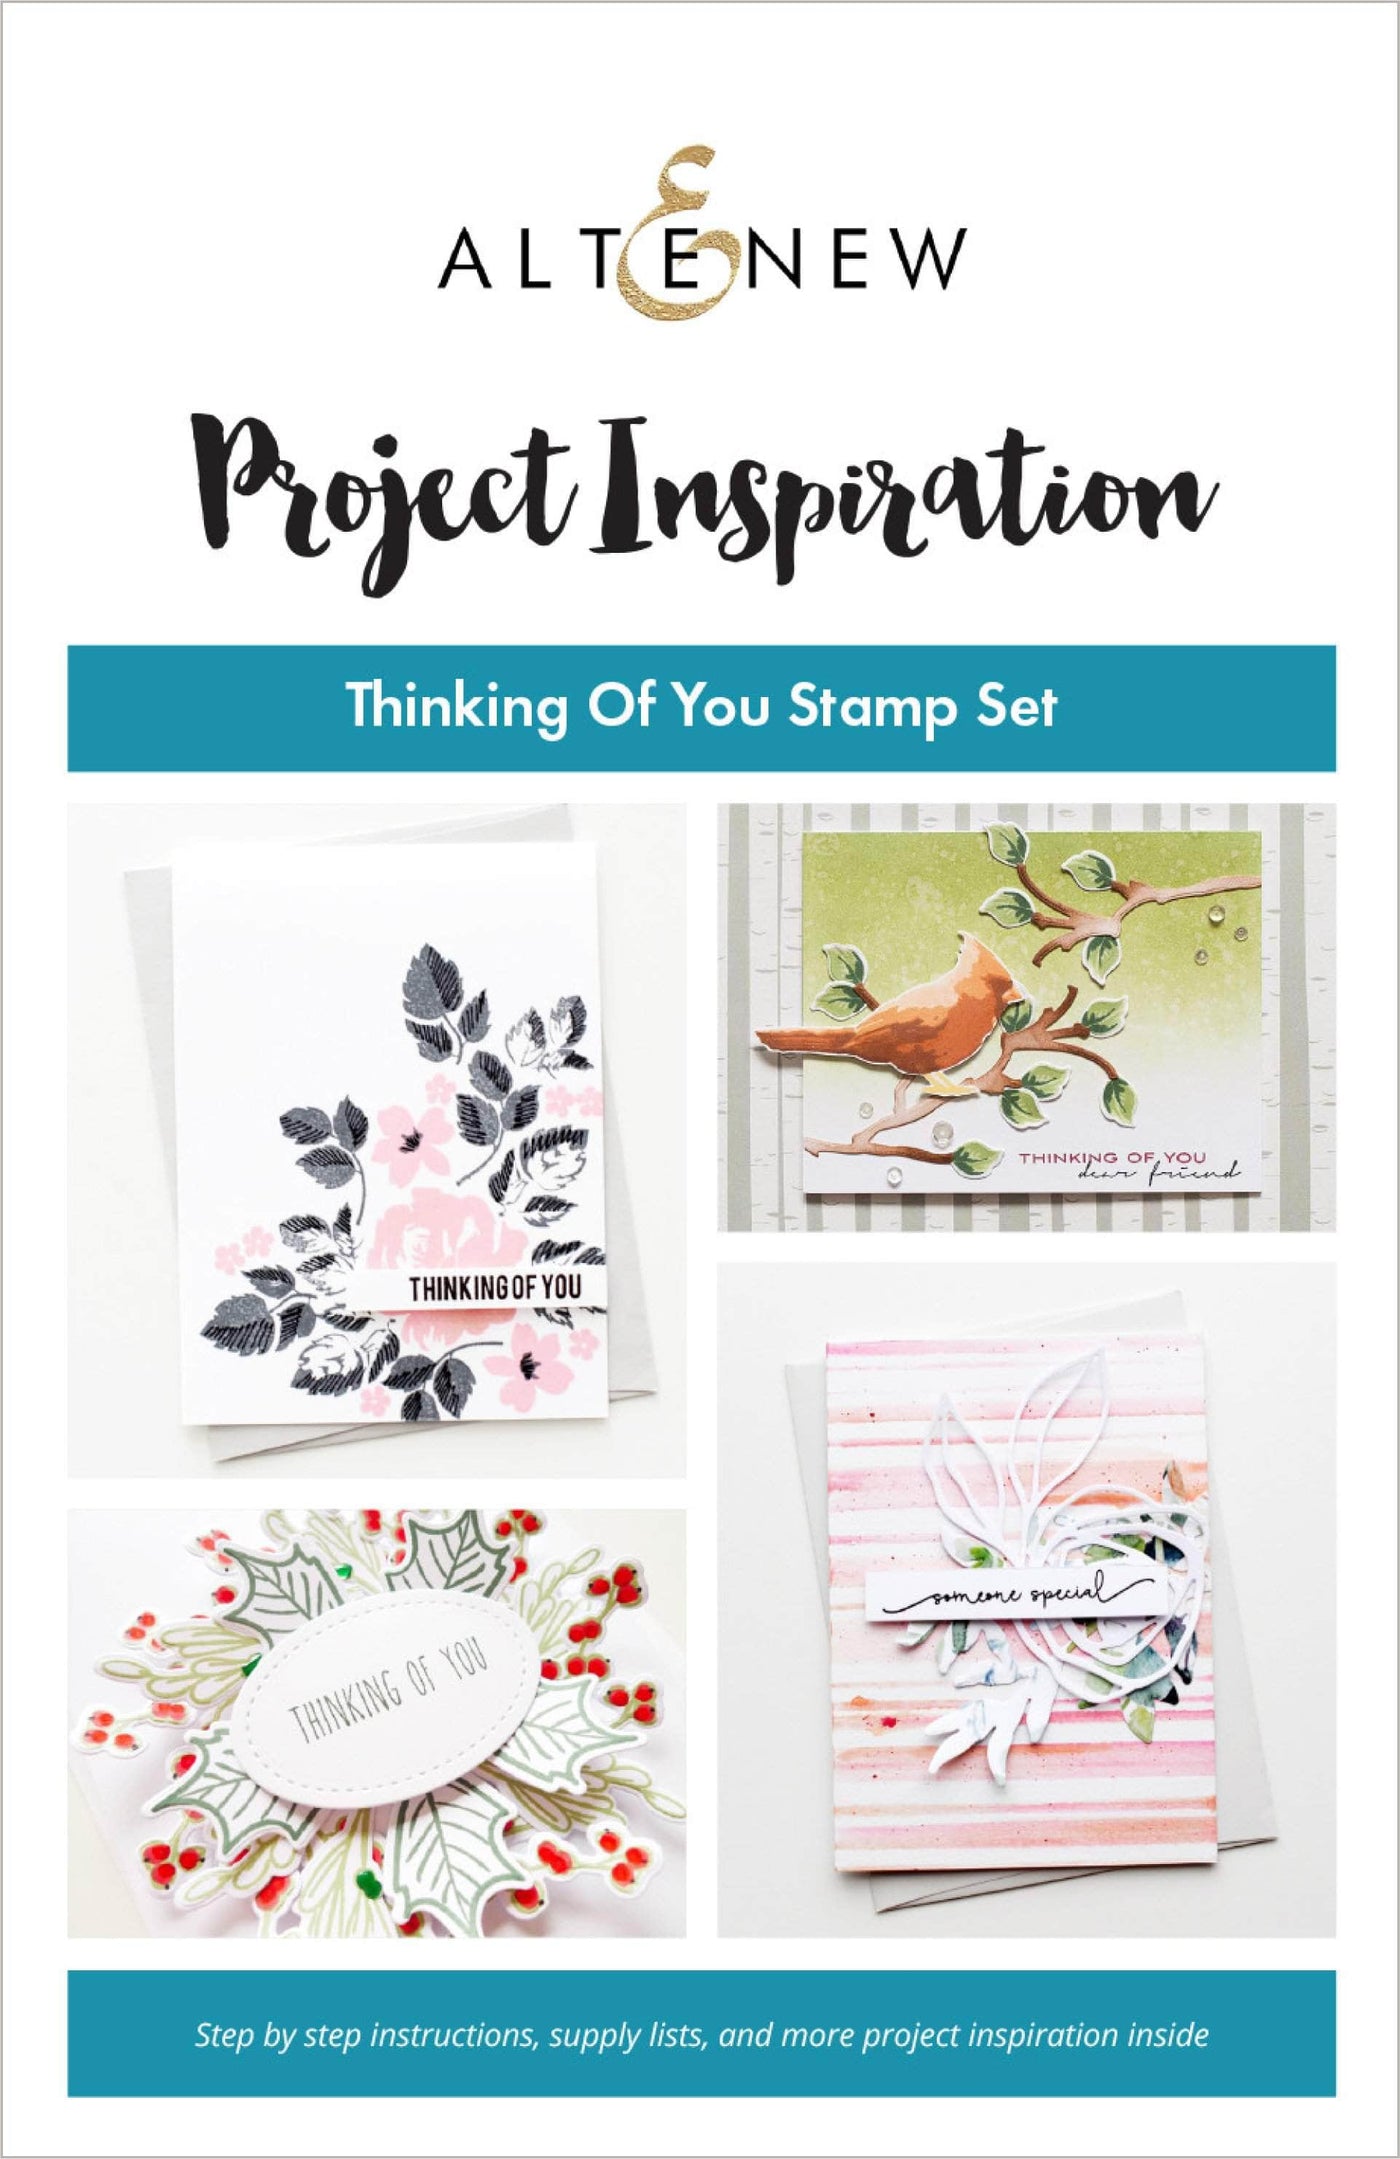 Printed Media Thinking of You Inspiration Guide